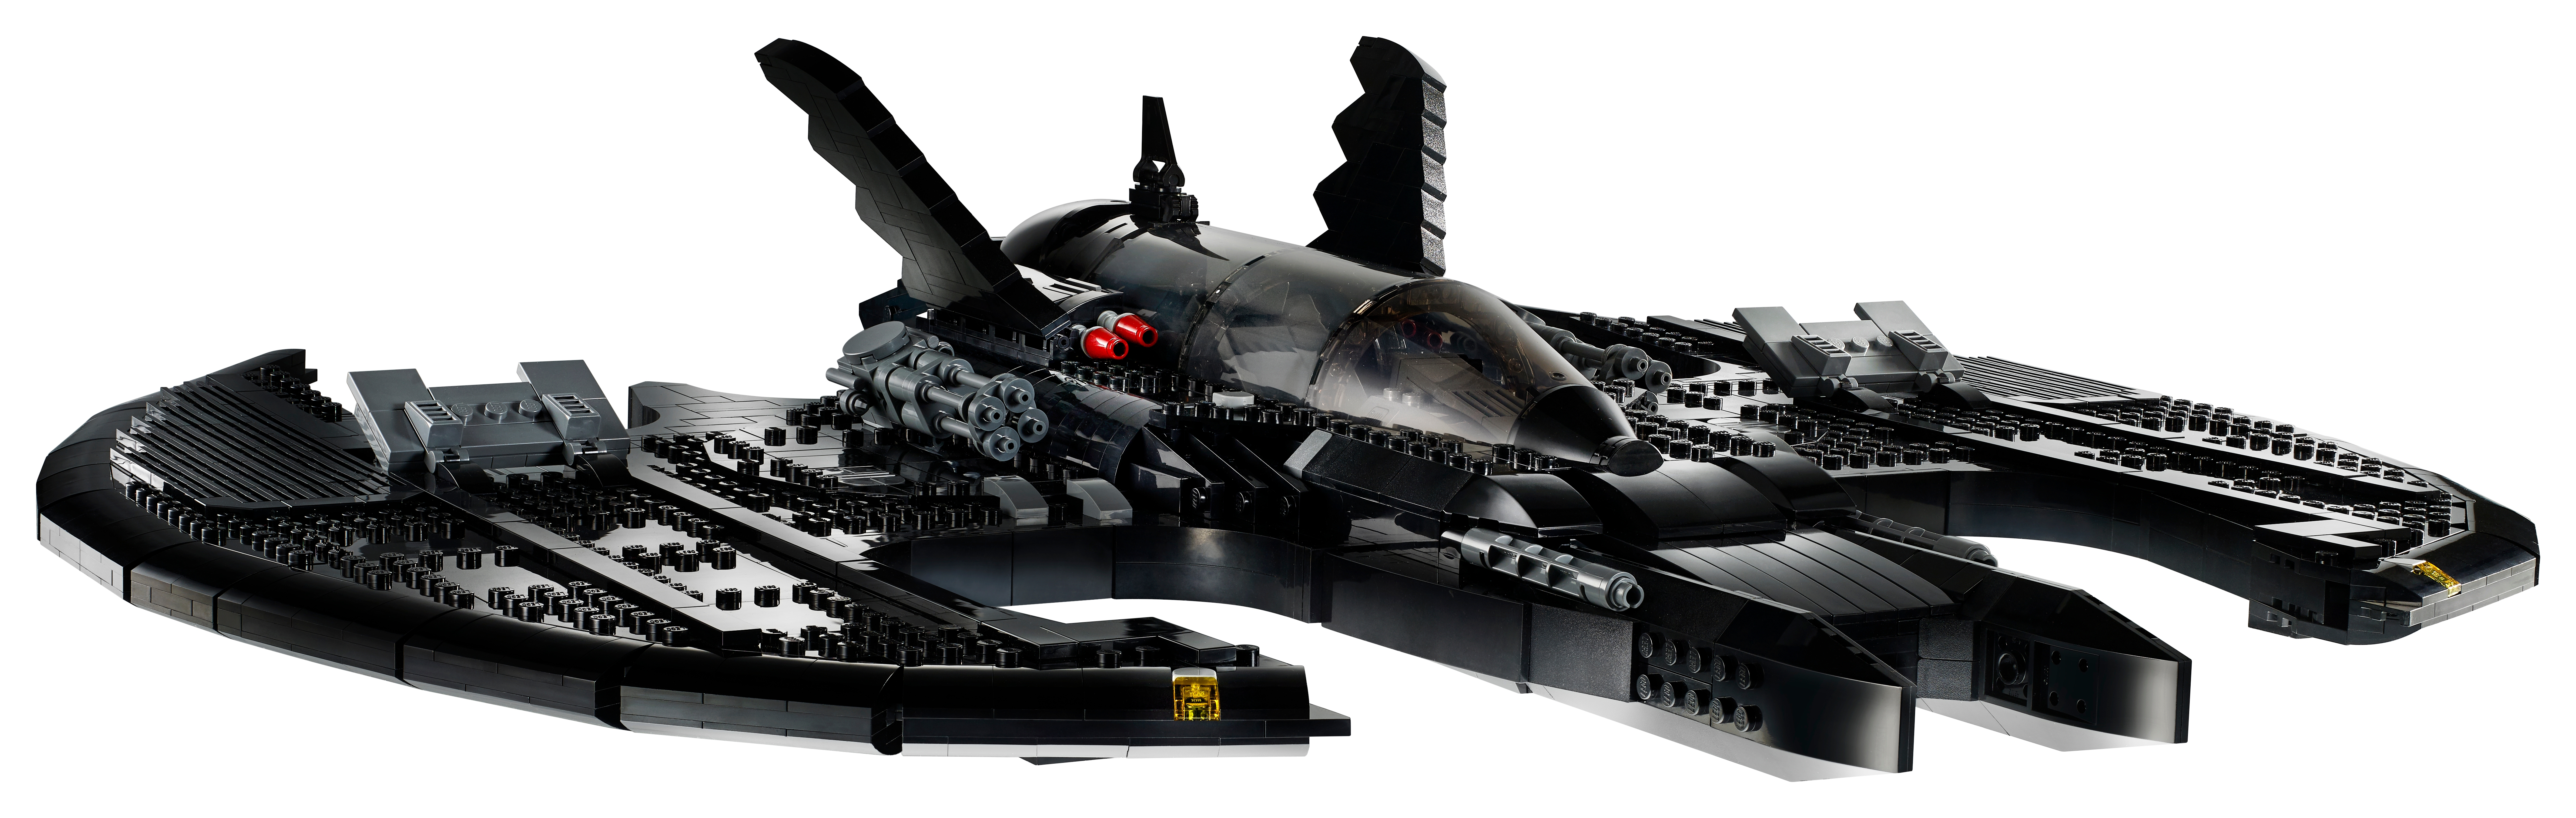 1989 Batwing 76161 | DC | Buy online at the Official LEGO® Shop US